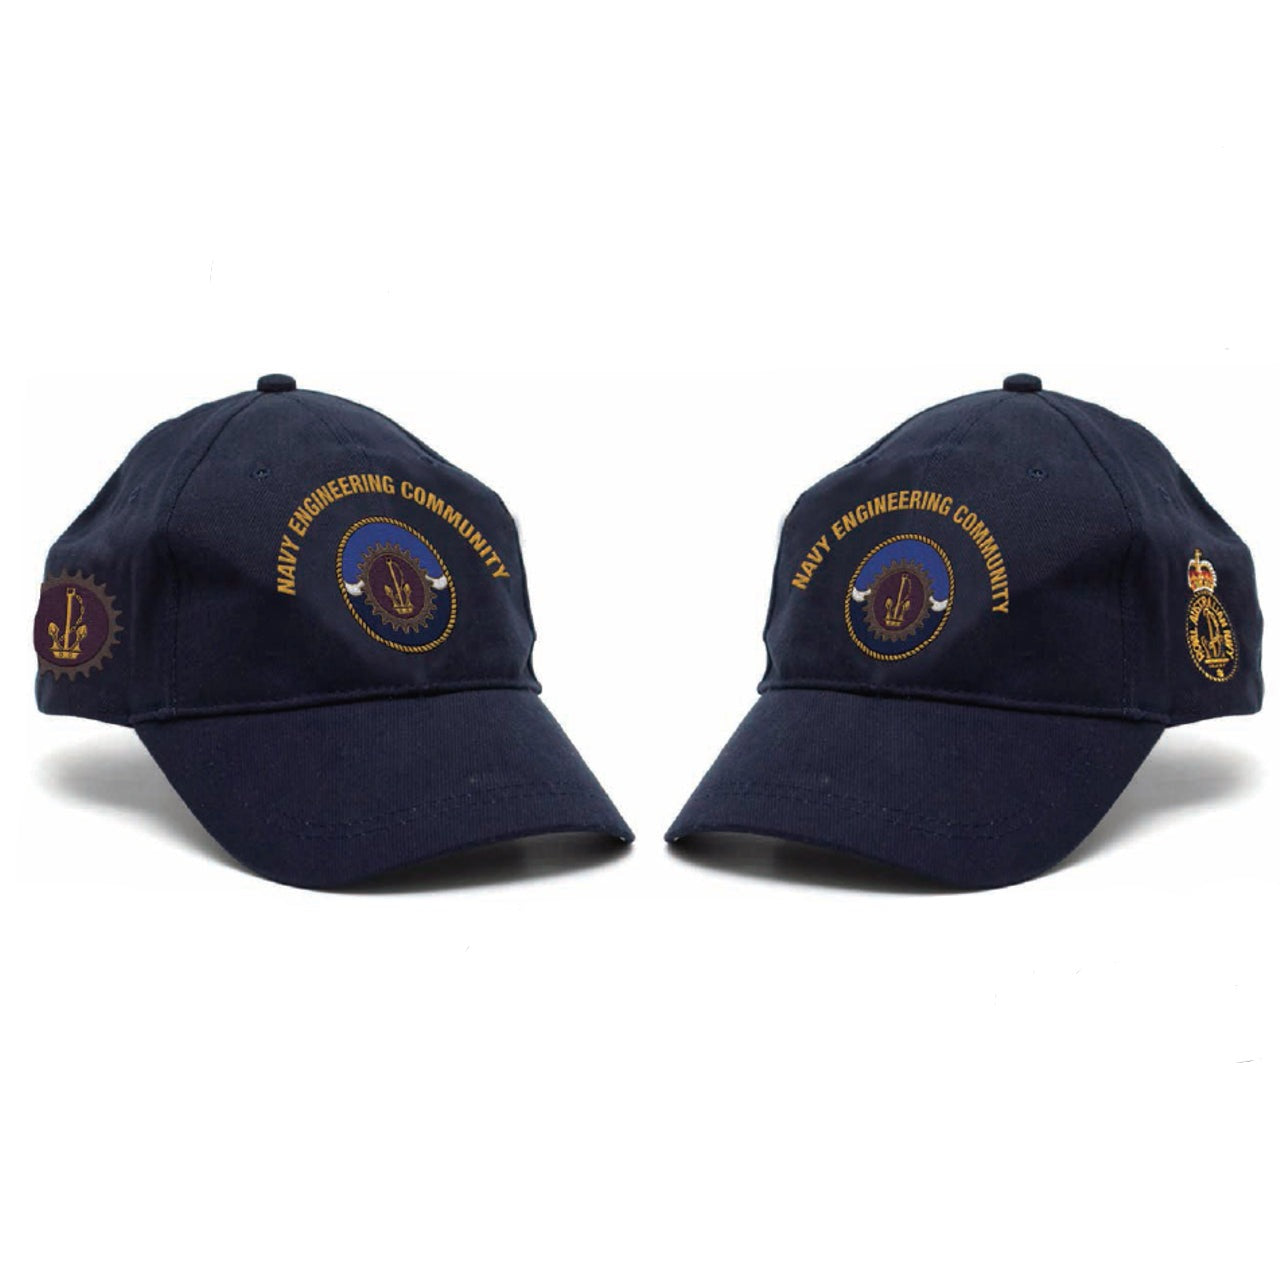 This Navy Engineering Community Uniform Cap is of the utmost quality and crafted from heavy brushed cotton. Featuring the ceremonial Navy badge boldly embroidered on the front, it's an approved choice to wear as part of your uniform. With an adjustable Hook-and-loop strap on the back, this cap fits most sizes effortlessly. Show your Navy pride with this timeless cap! www.moralepatches.com.au